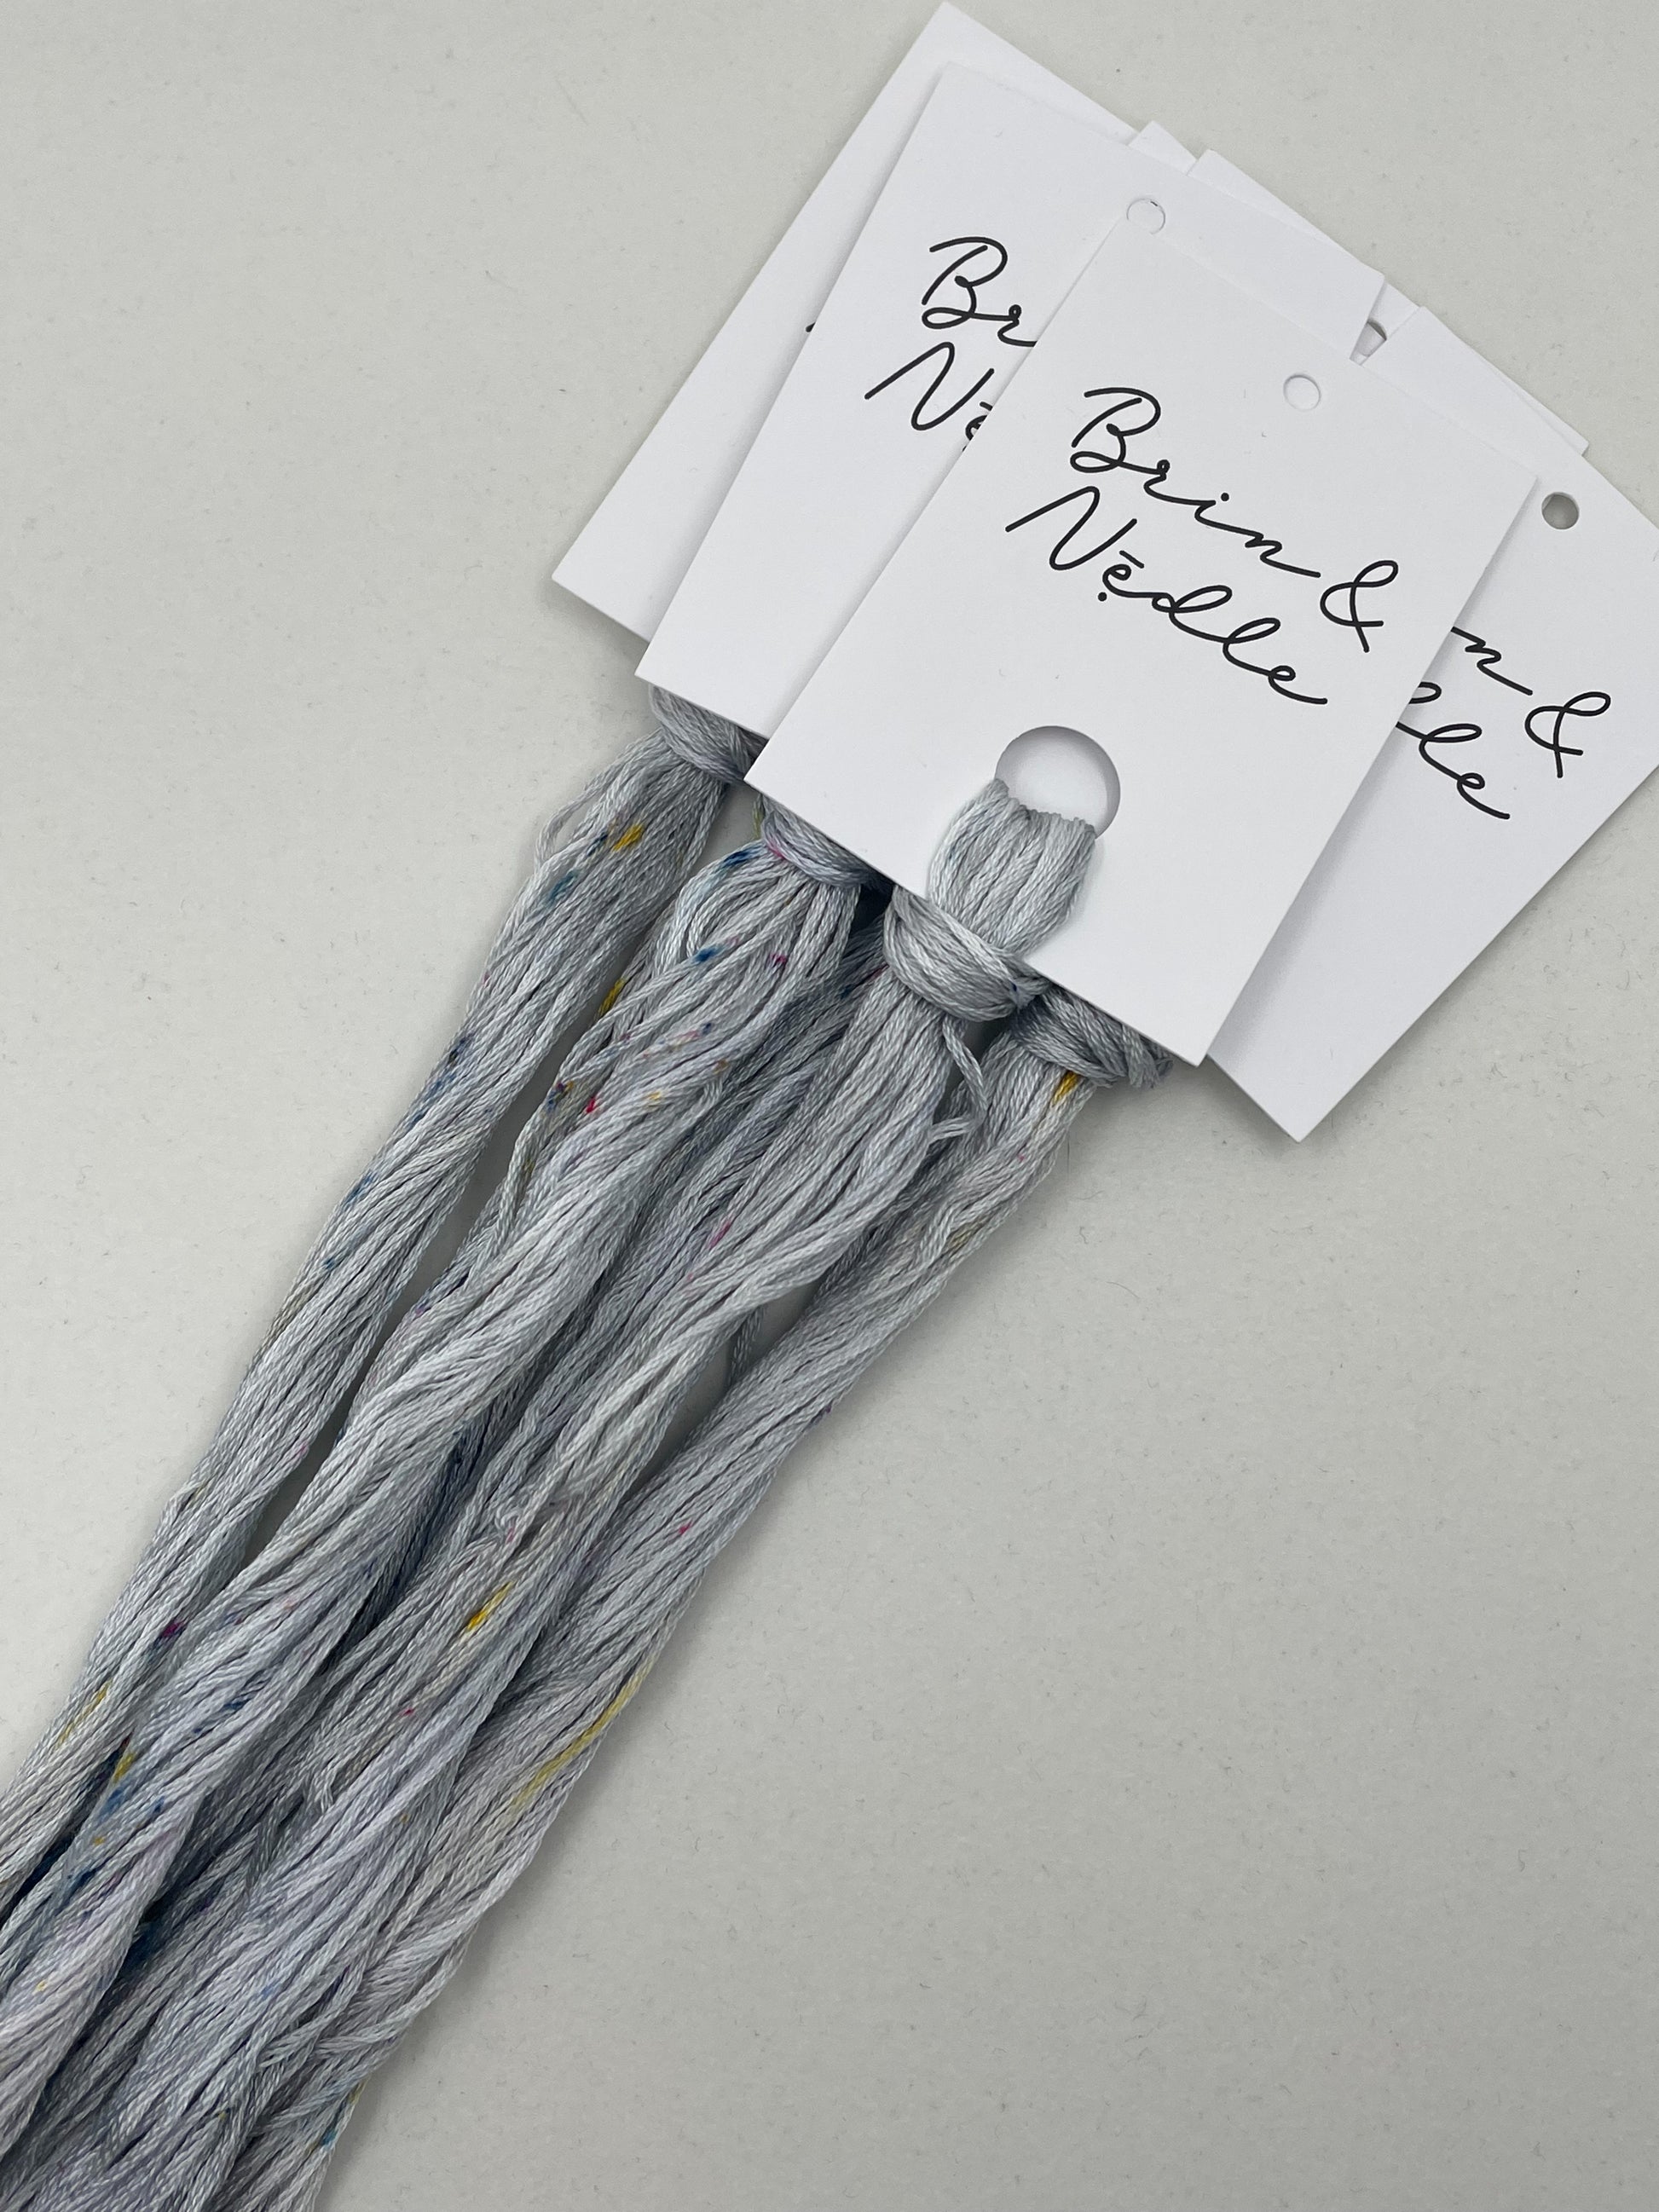 Six strand cotton floss in variegated light grey tones with Patty speckles